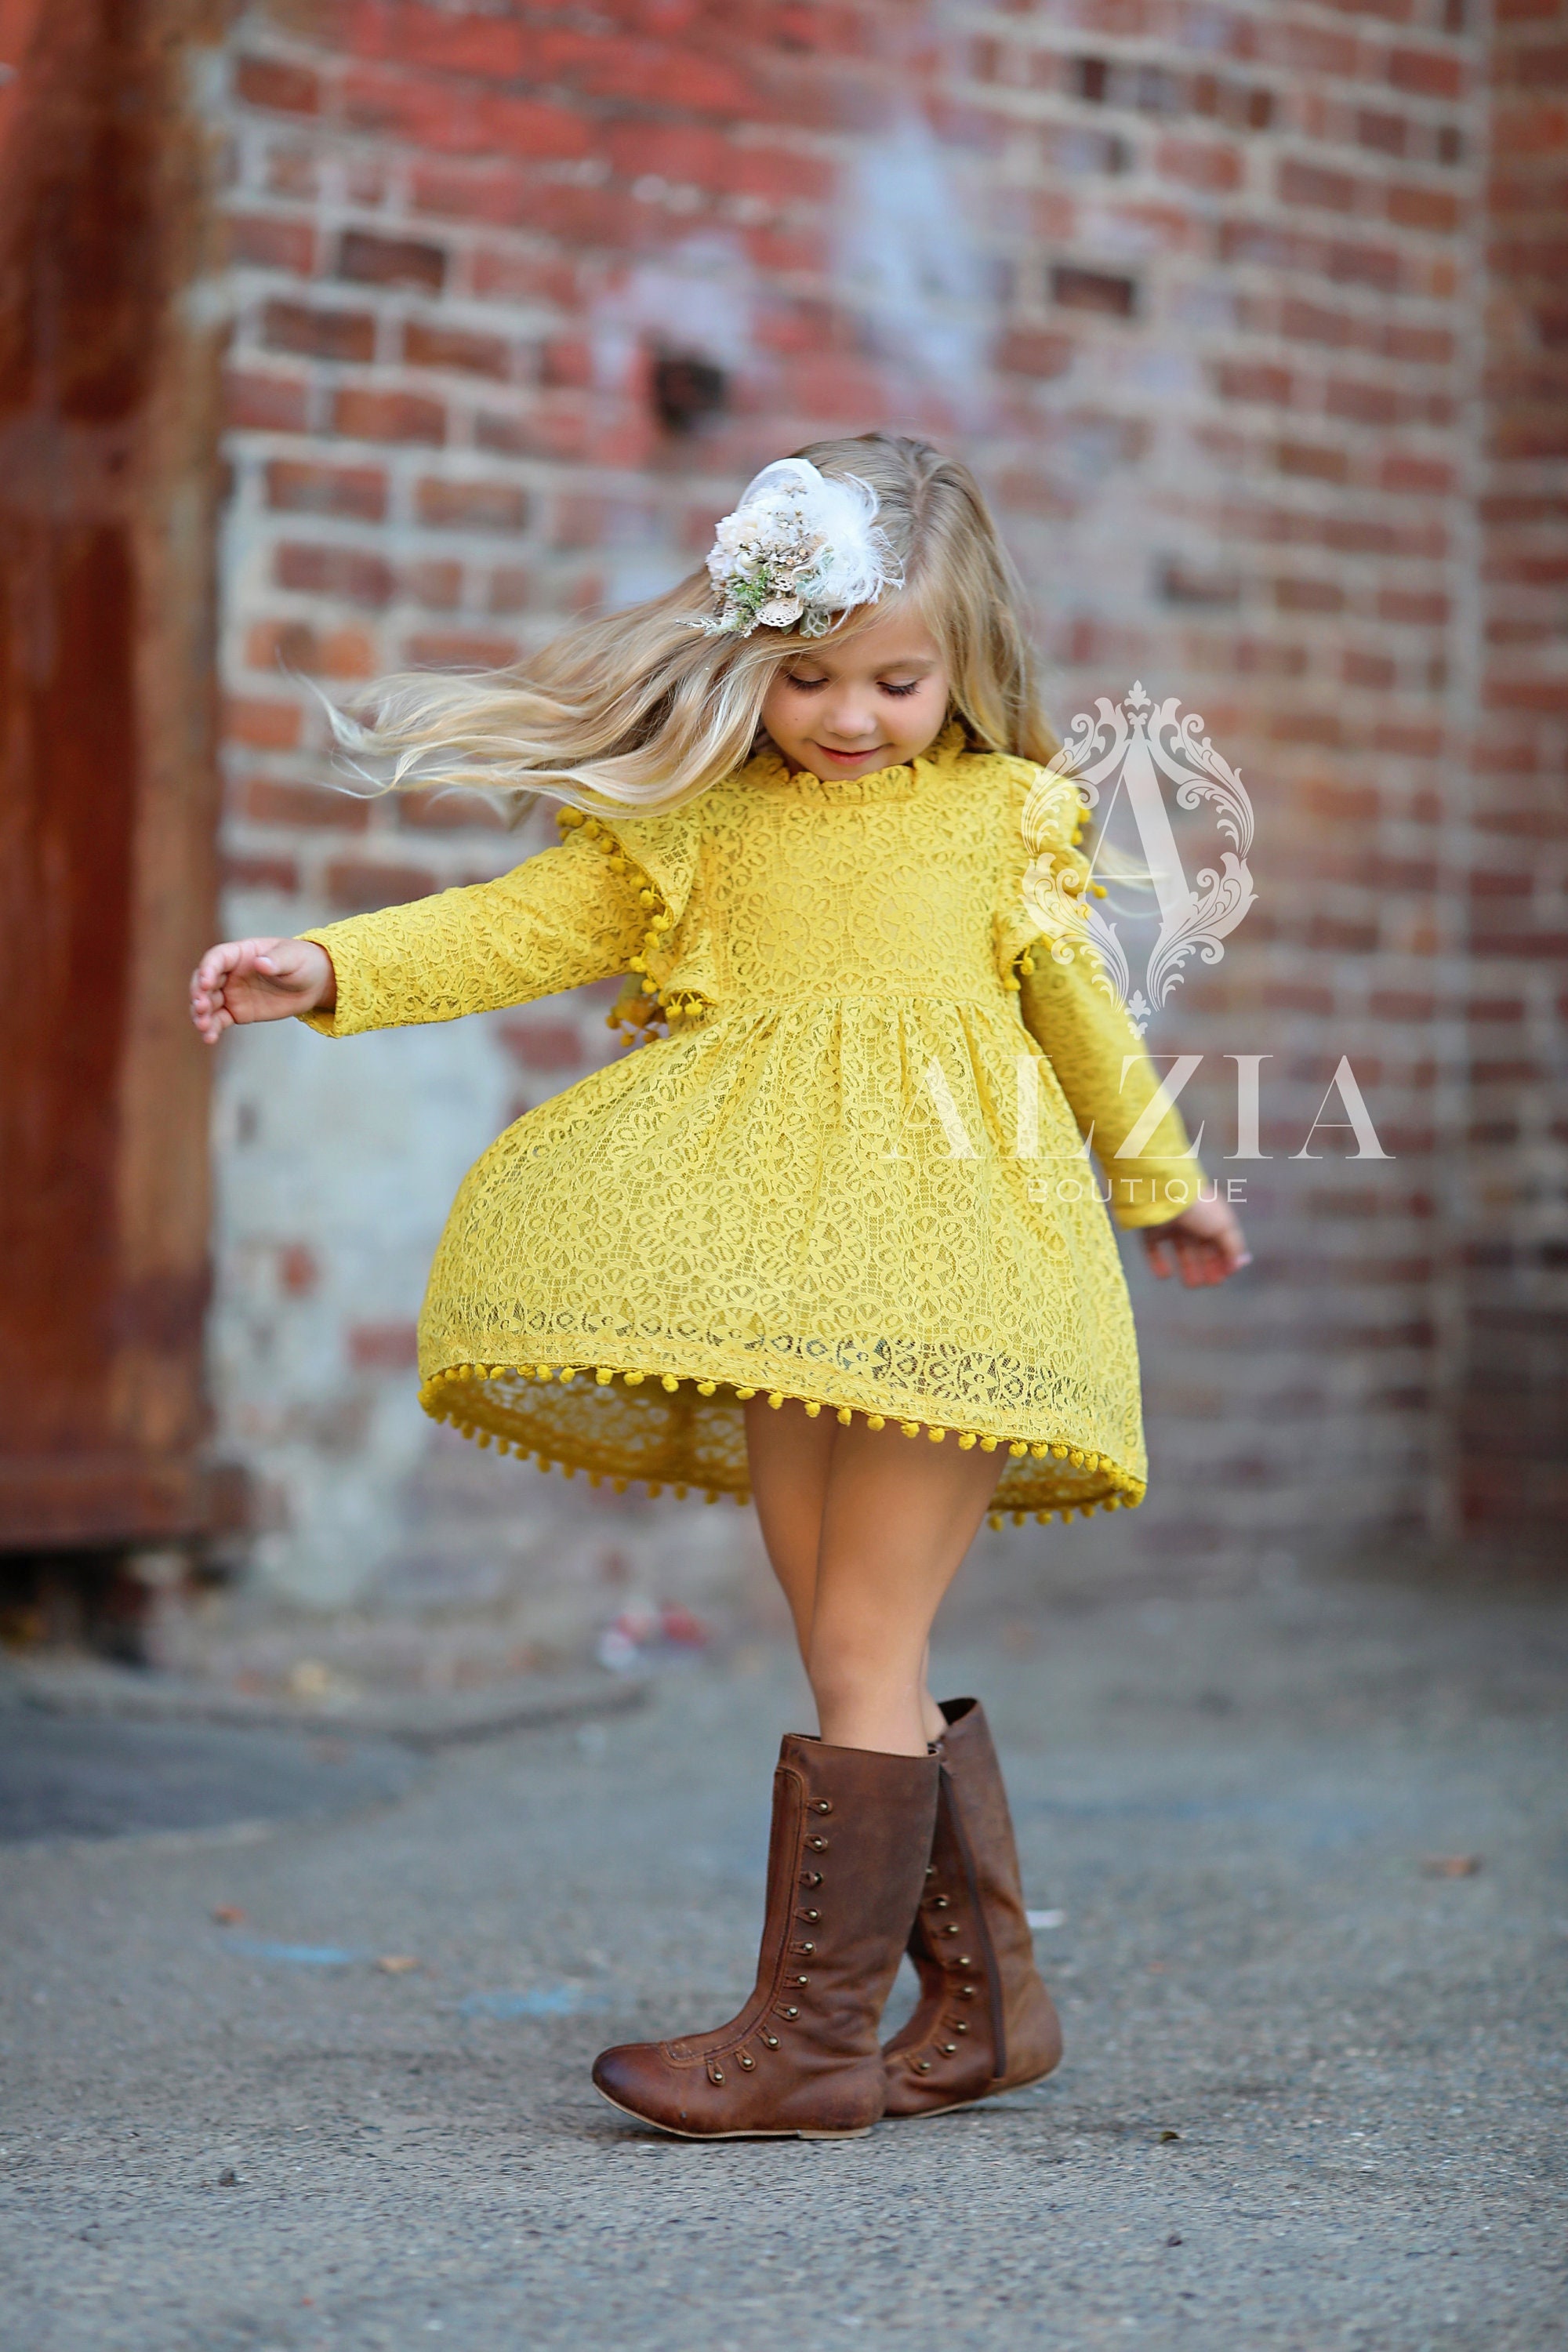 Casual Fall Outfits, My Looks, The Girl in the Yellow Dress